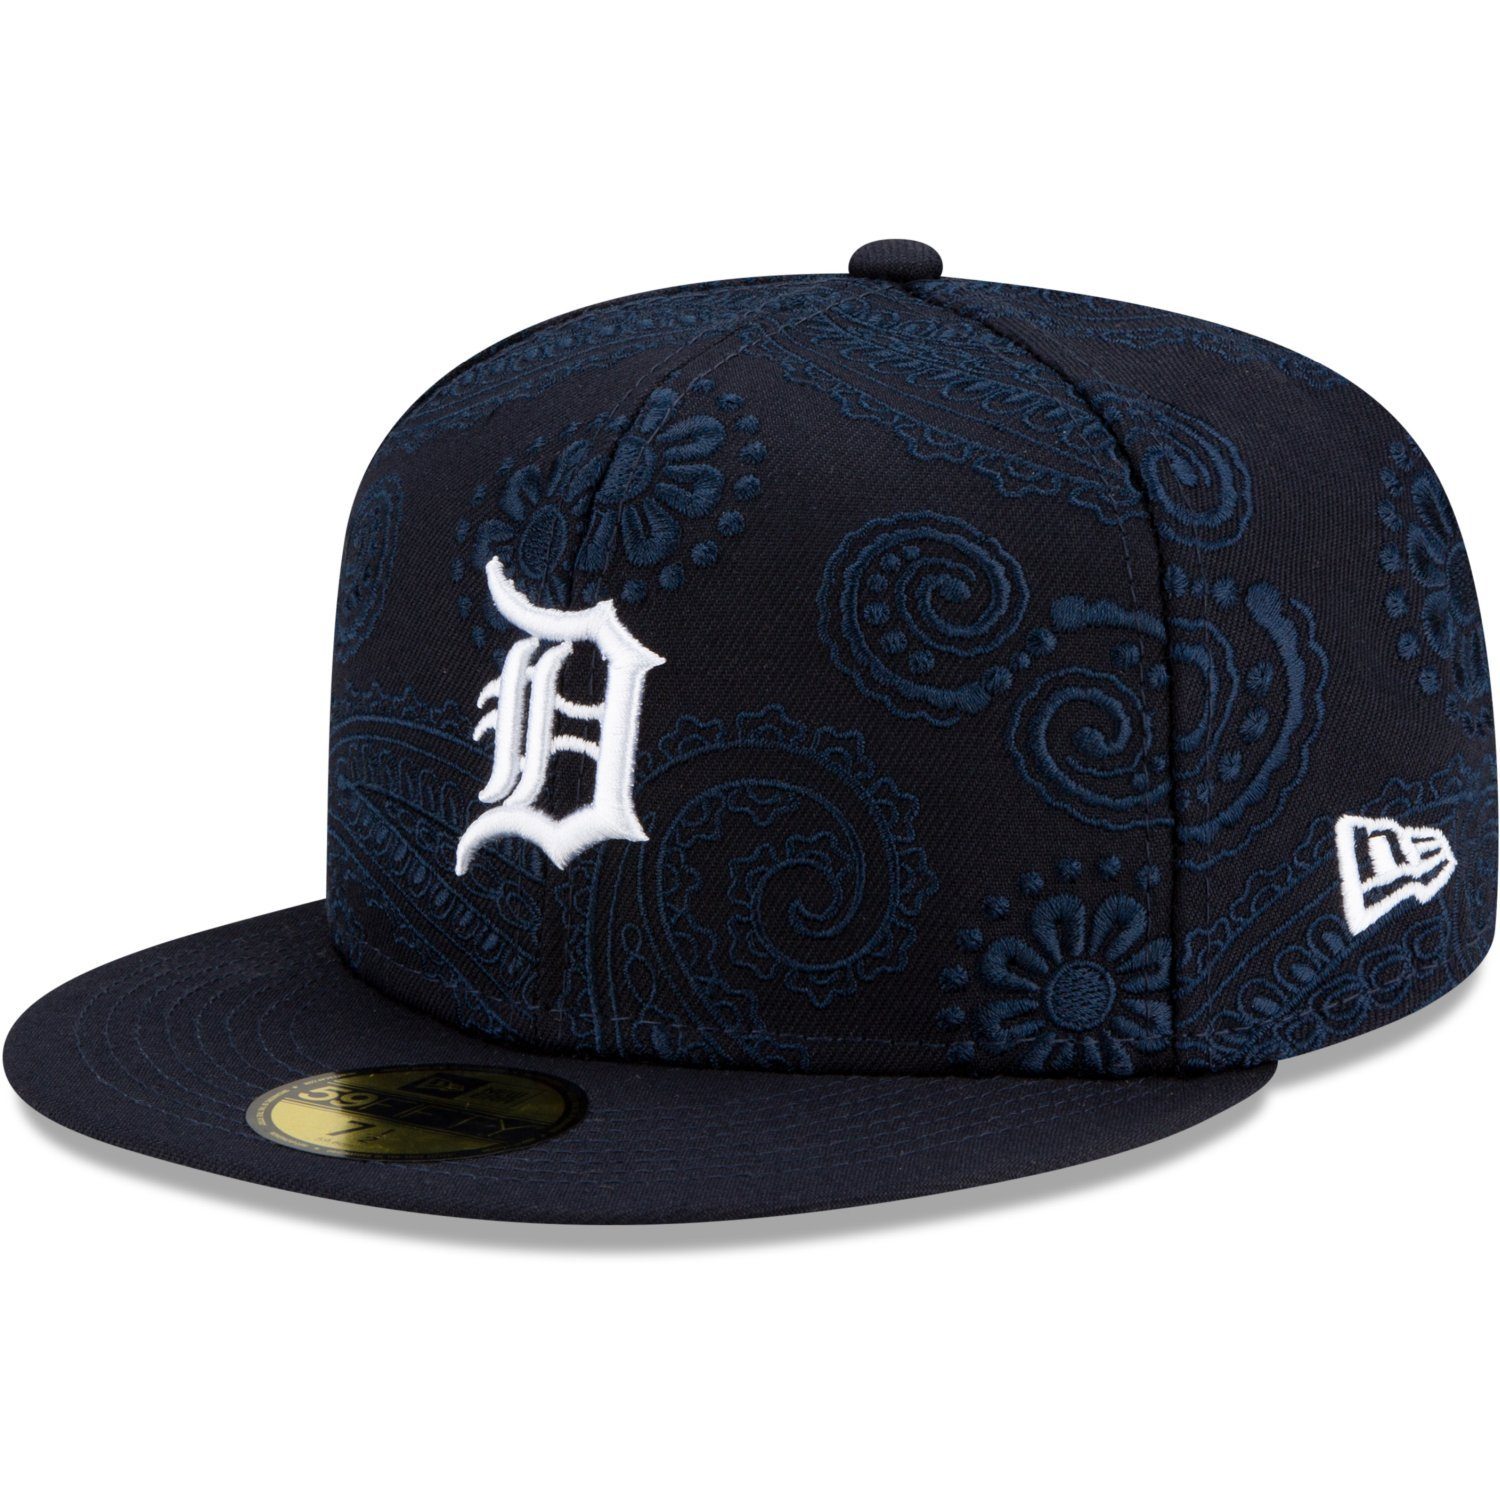 Fitted PAISLEY SWIRL 59Fifty Cap Detroit Era Tigers New